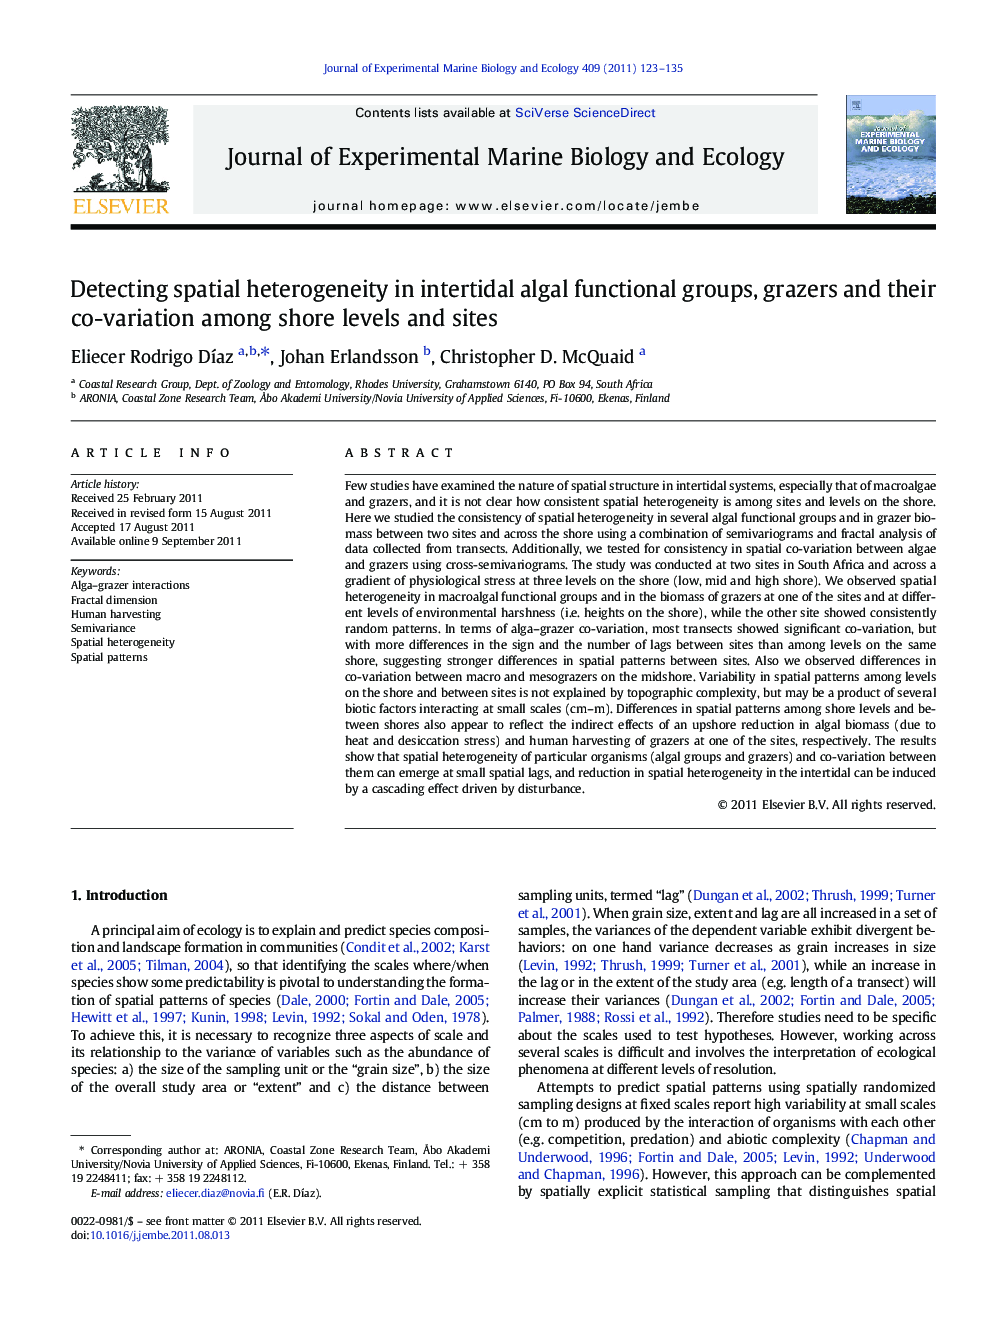 Detecting spatial heterogeneity in intertidal algal functional groups, grazers and their co-variation among shore levels and sites